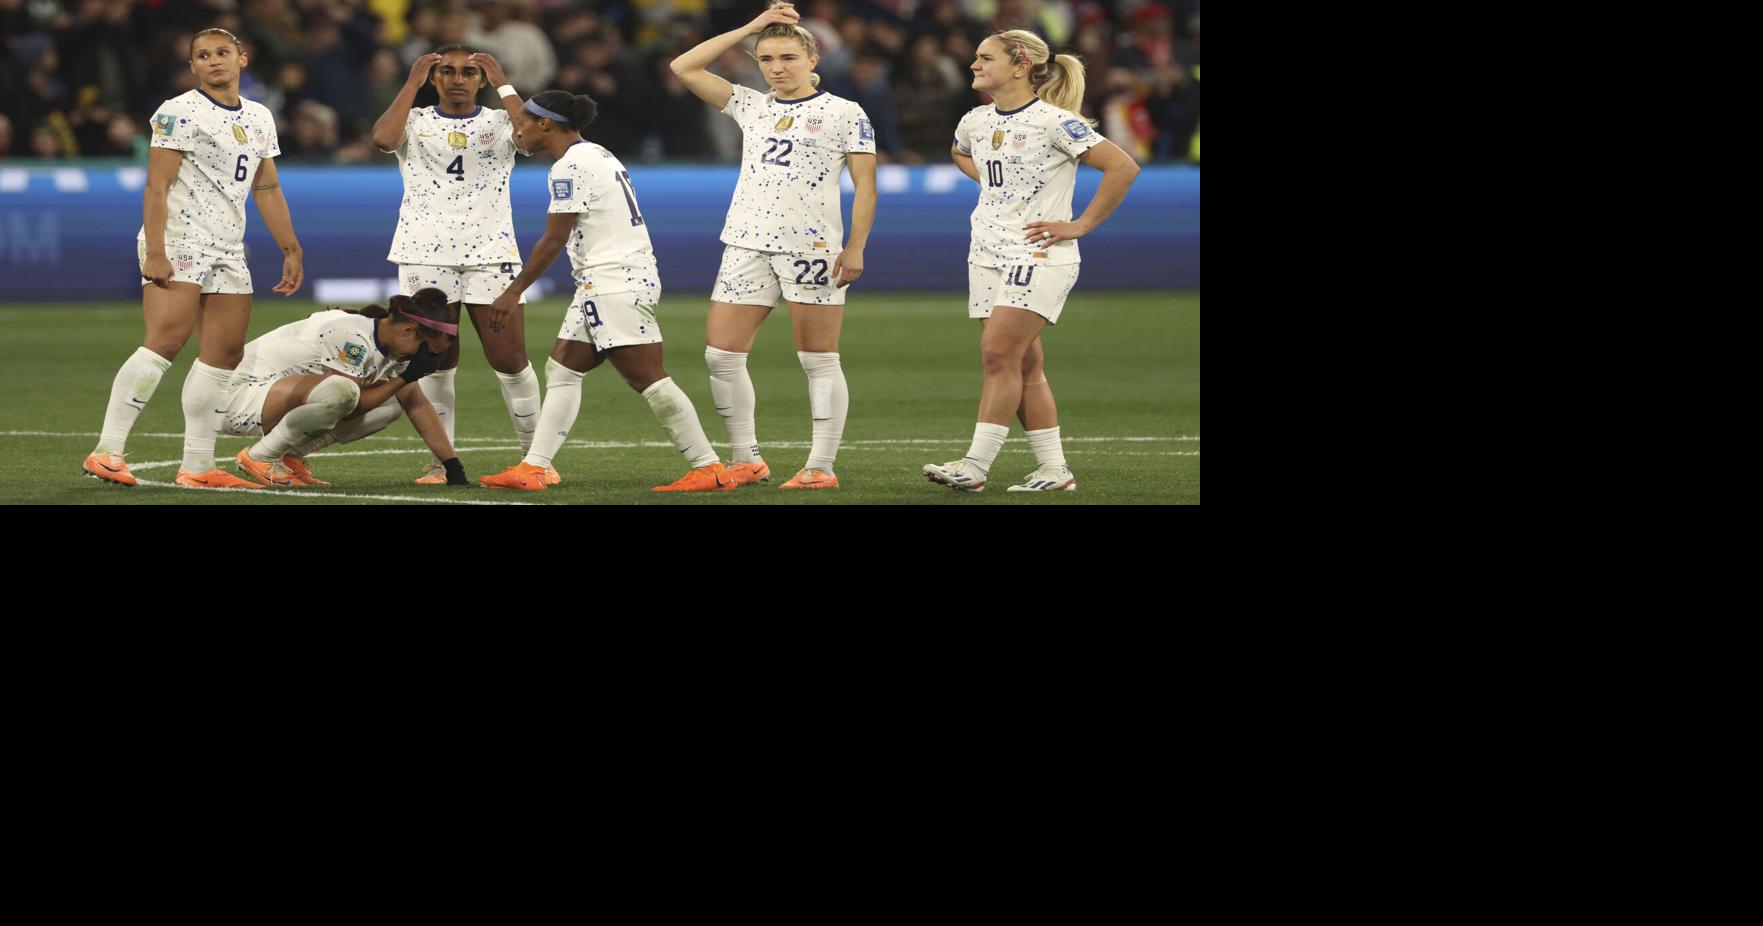 US women's soccer is in transition heading into Olympics. Spain hopes to  build off World Cup win | Sports | dailygazette.com